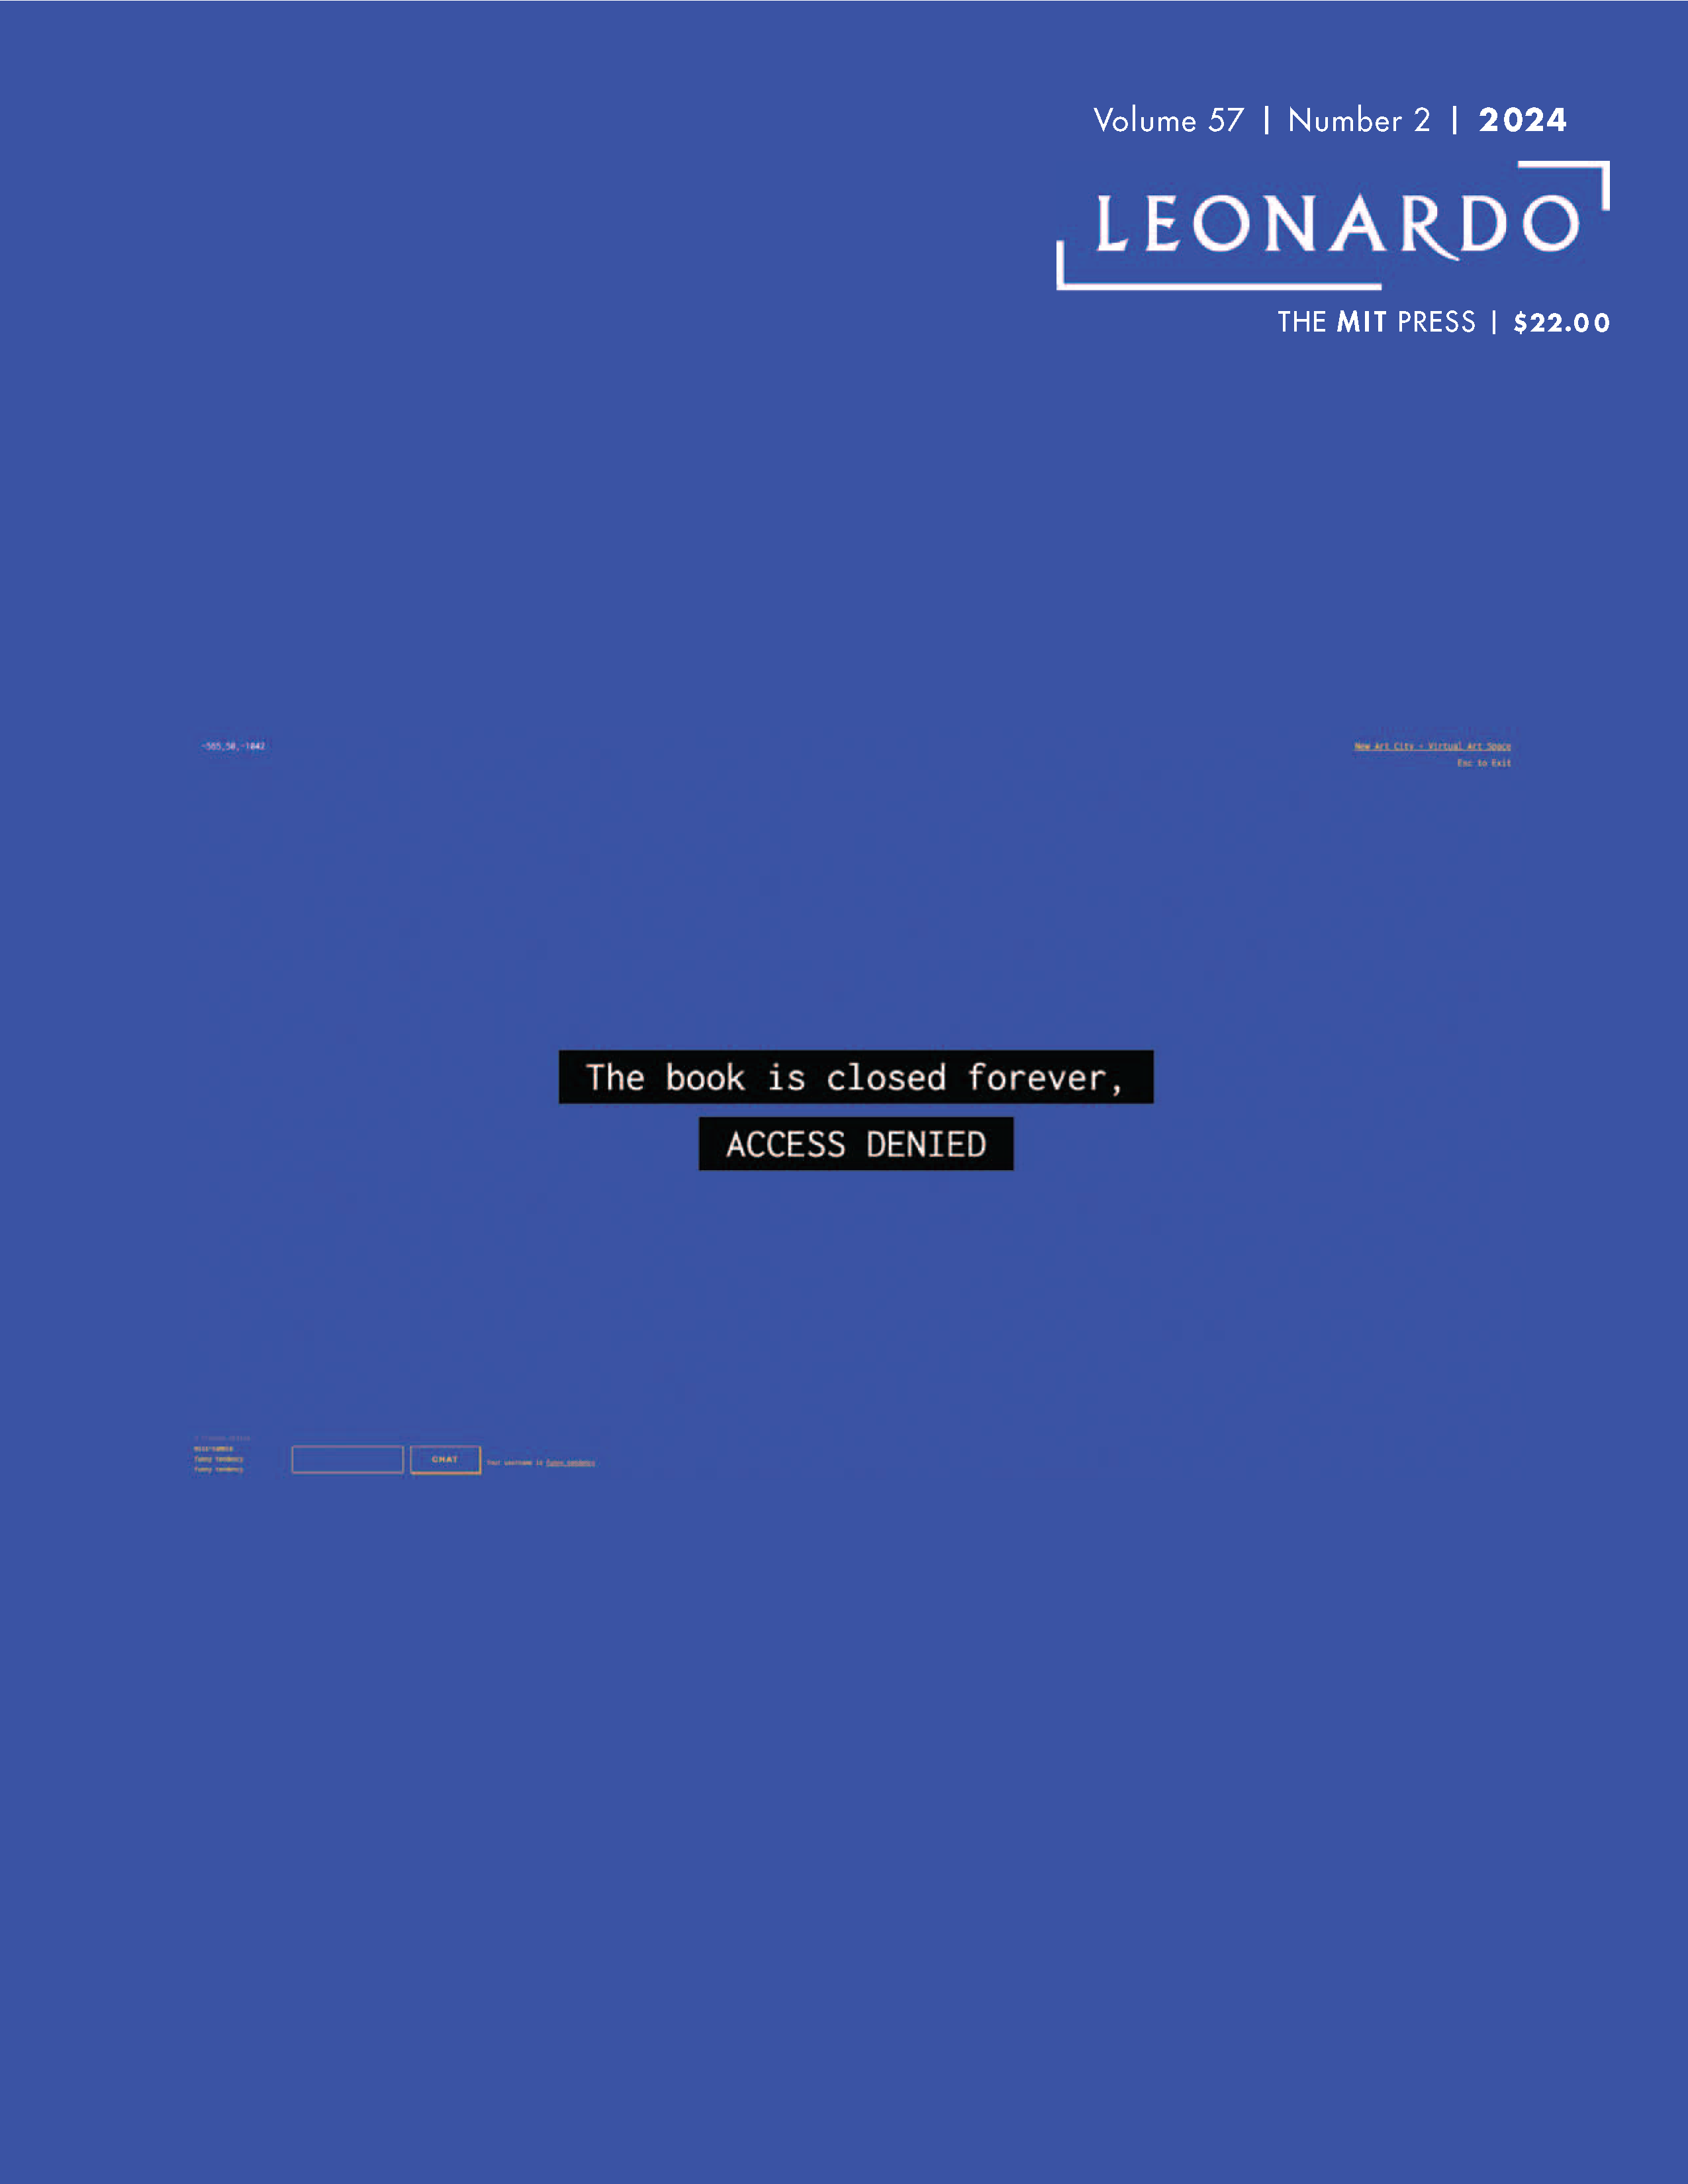 Subtle Flex: A still from Unseen Sound on the cover of Leonardo journal. A blue screen of death background with caption bars reading, "The book is closed forever, Access denied."